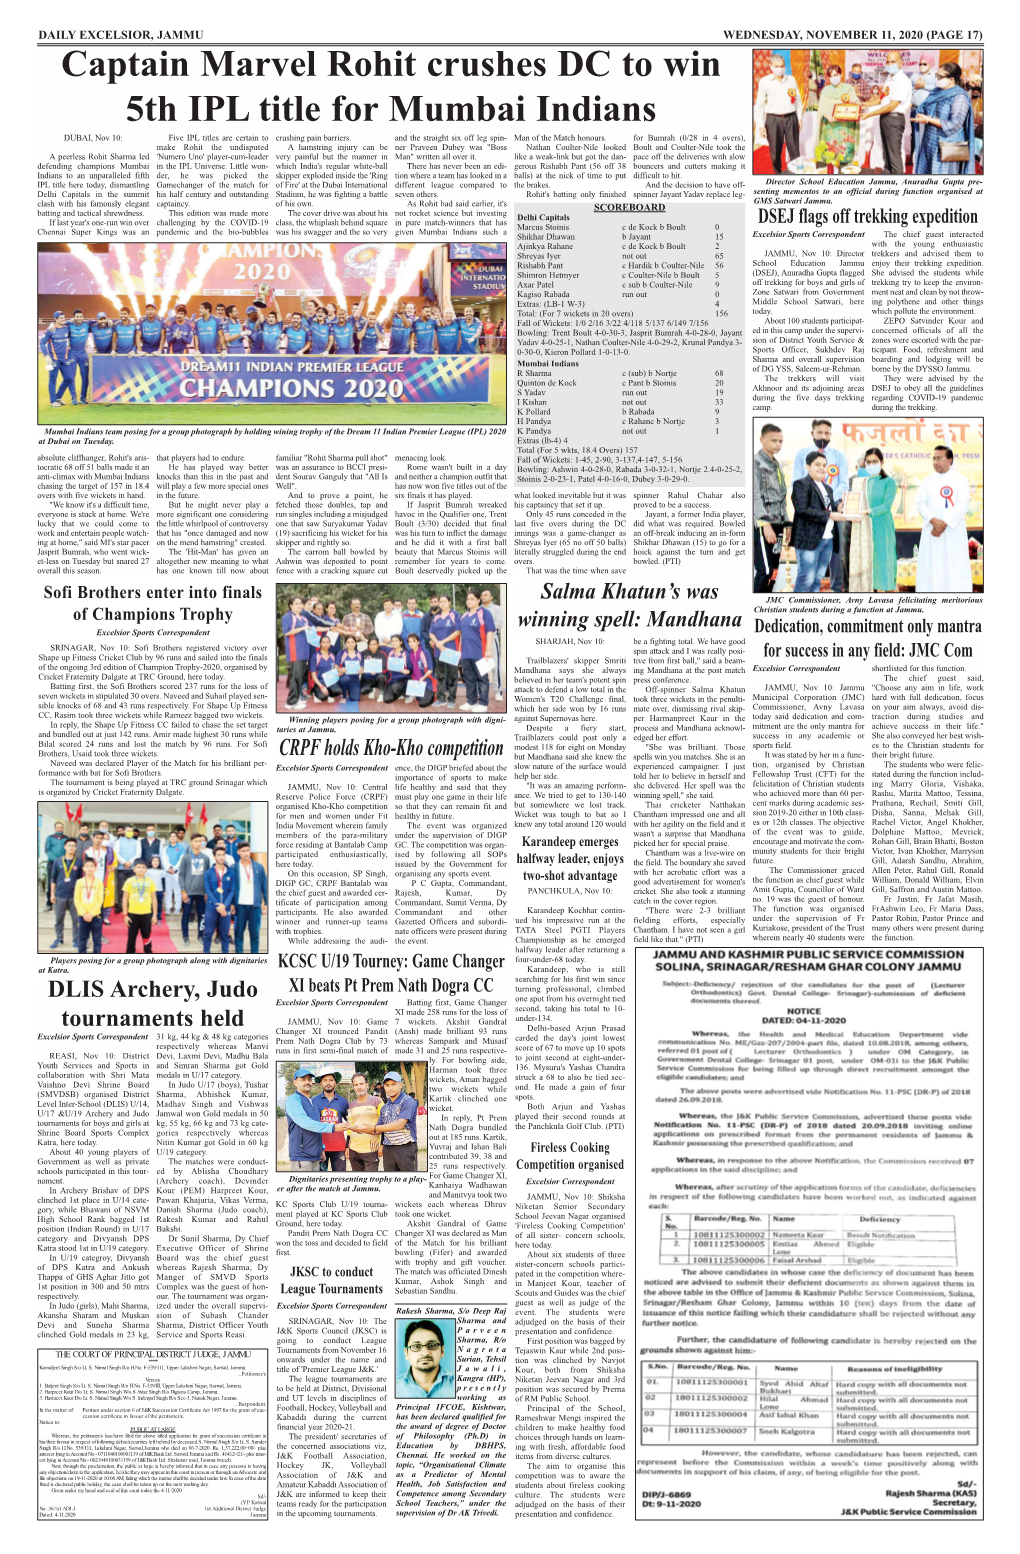 Page17 Sports.Qxd (Page 1)